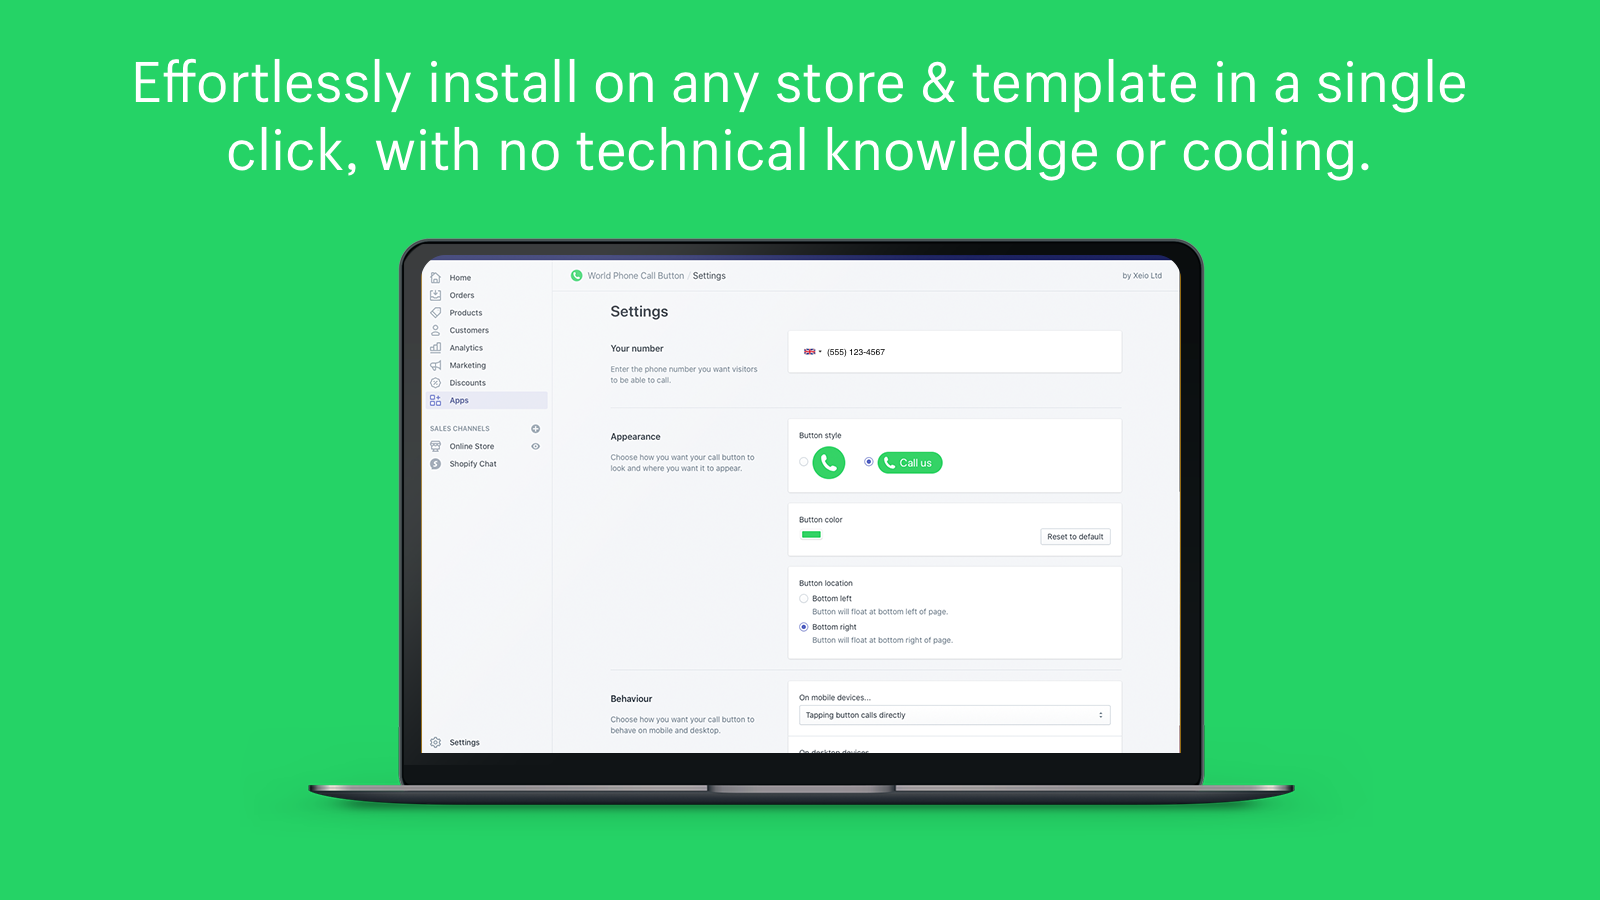 Effortlessly install on any store or template in a single click